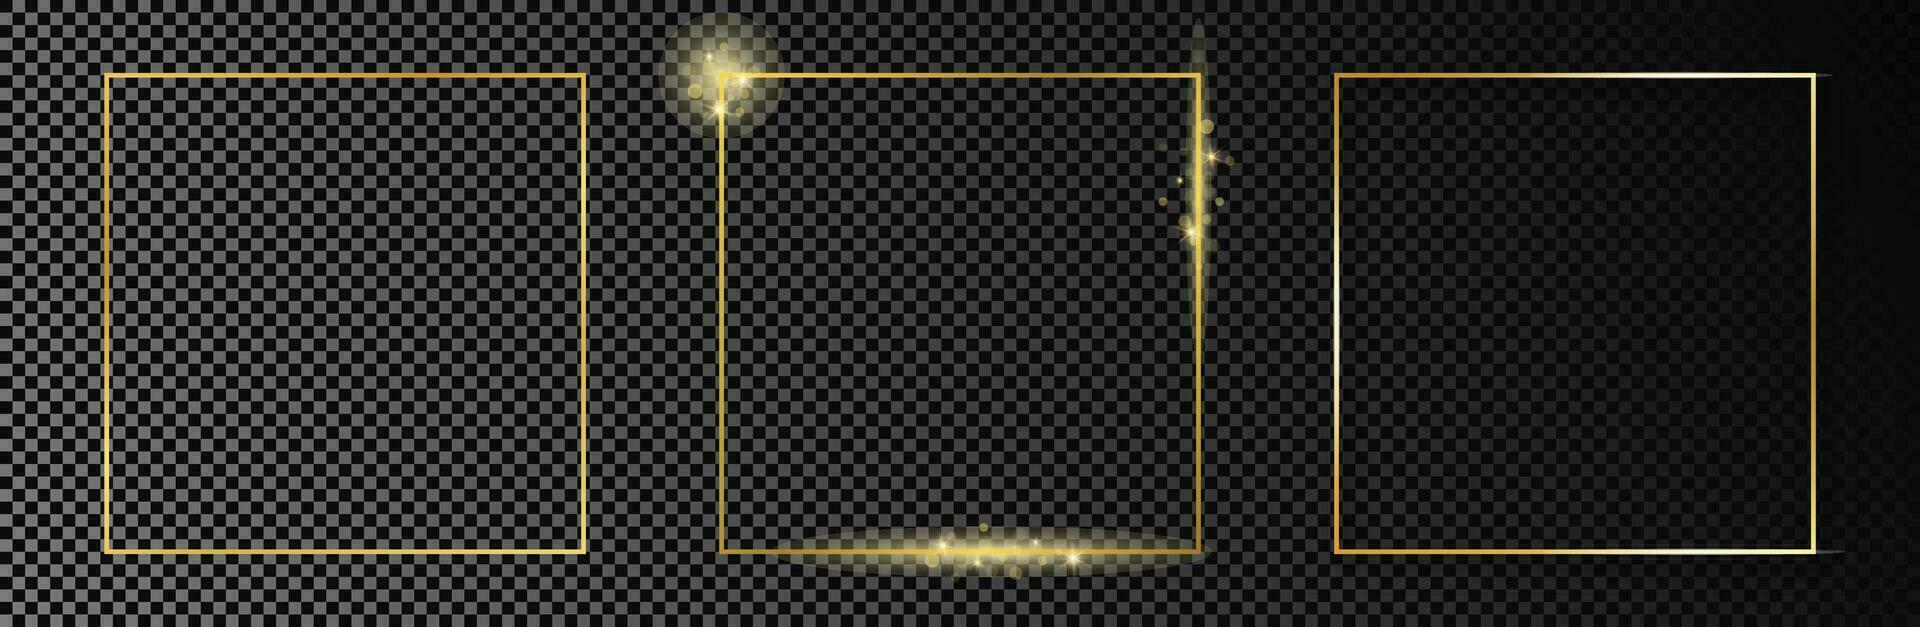 Gold glowing square frame vector